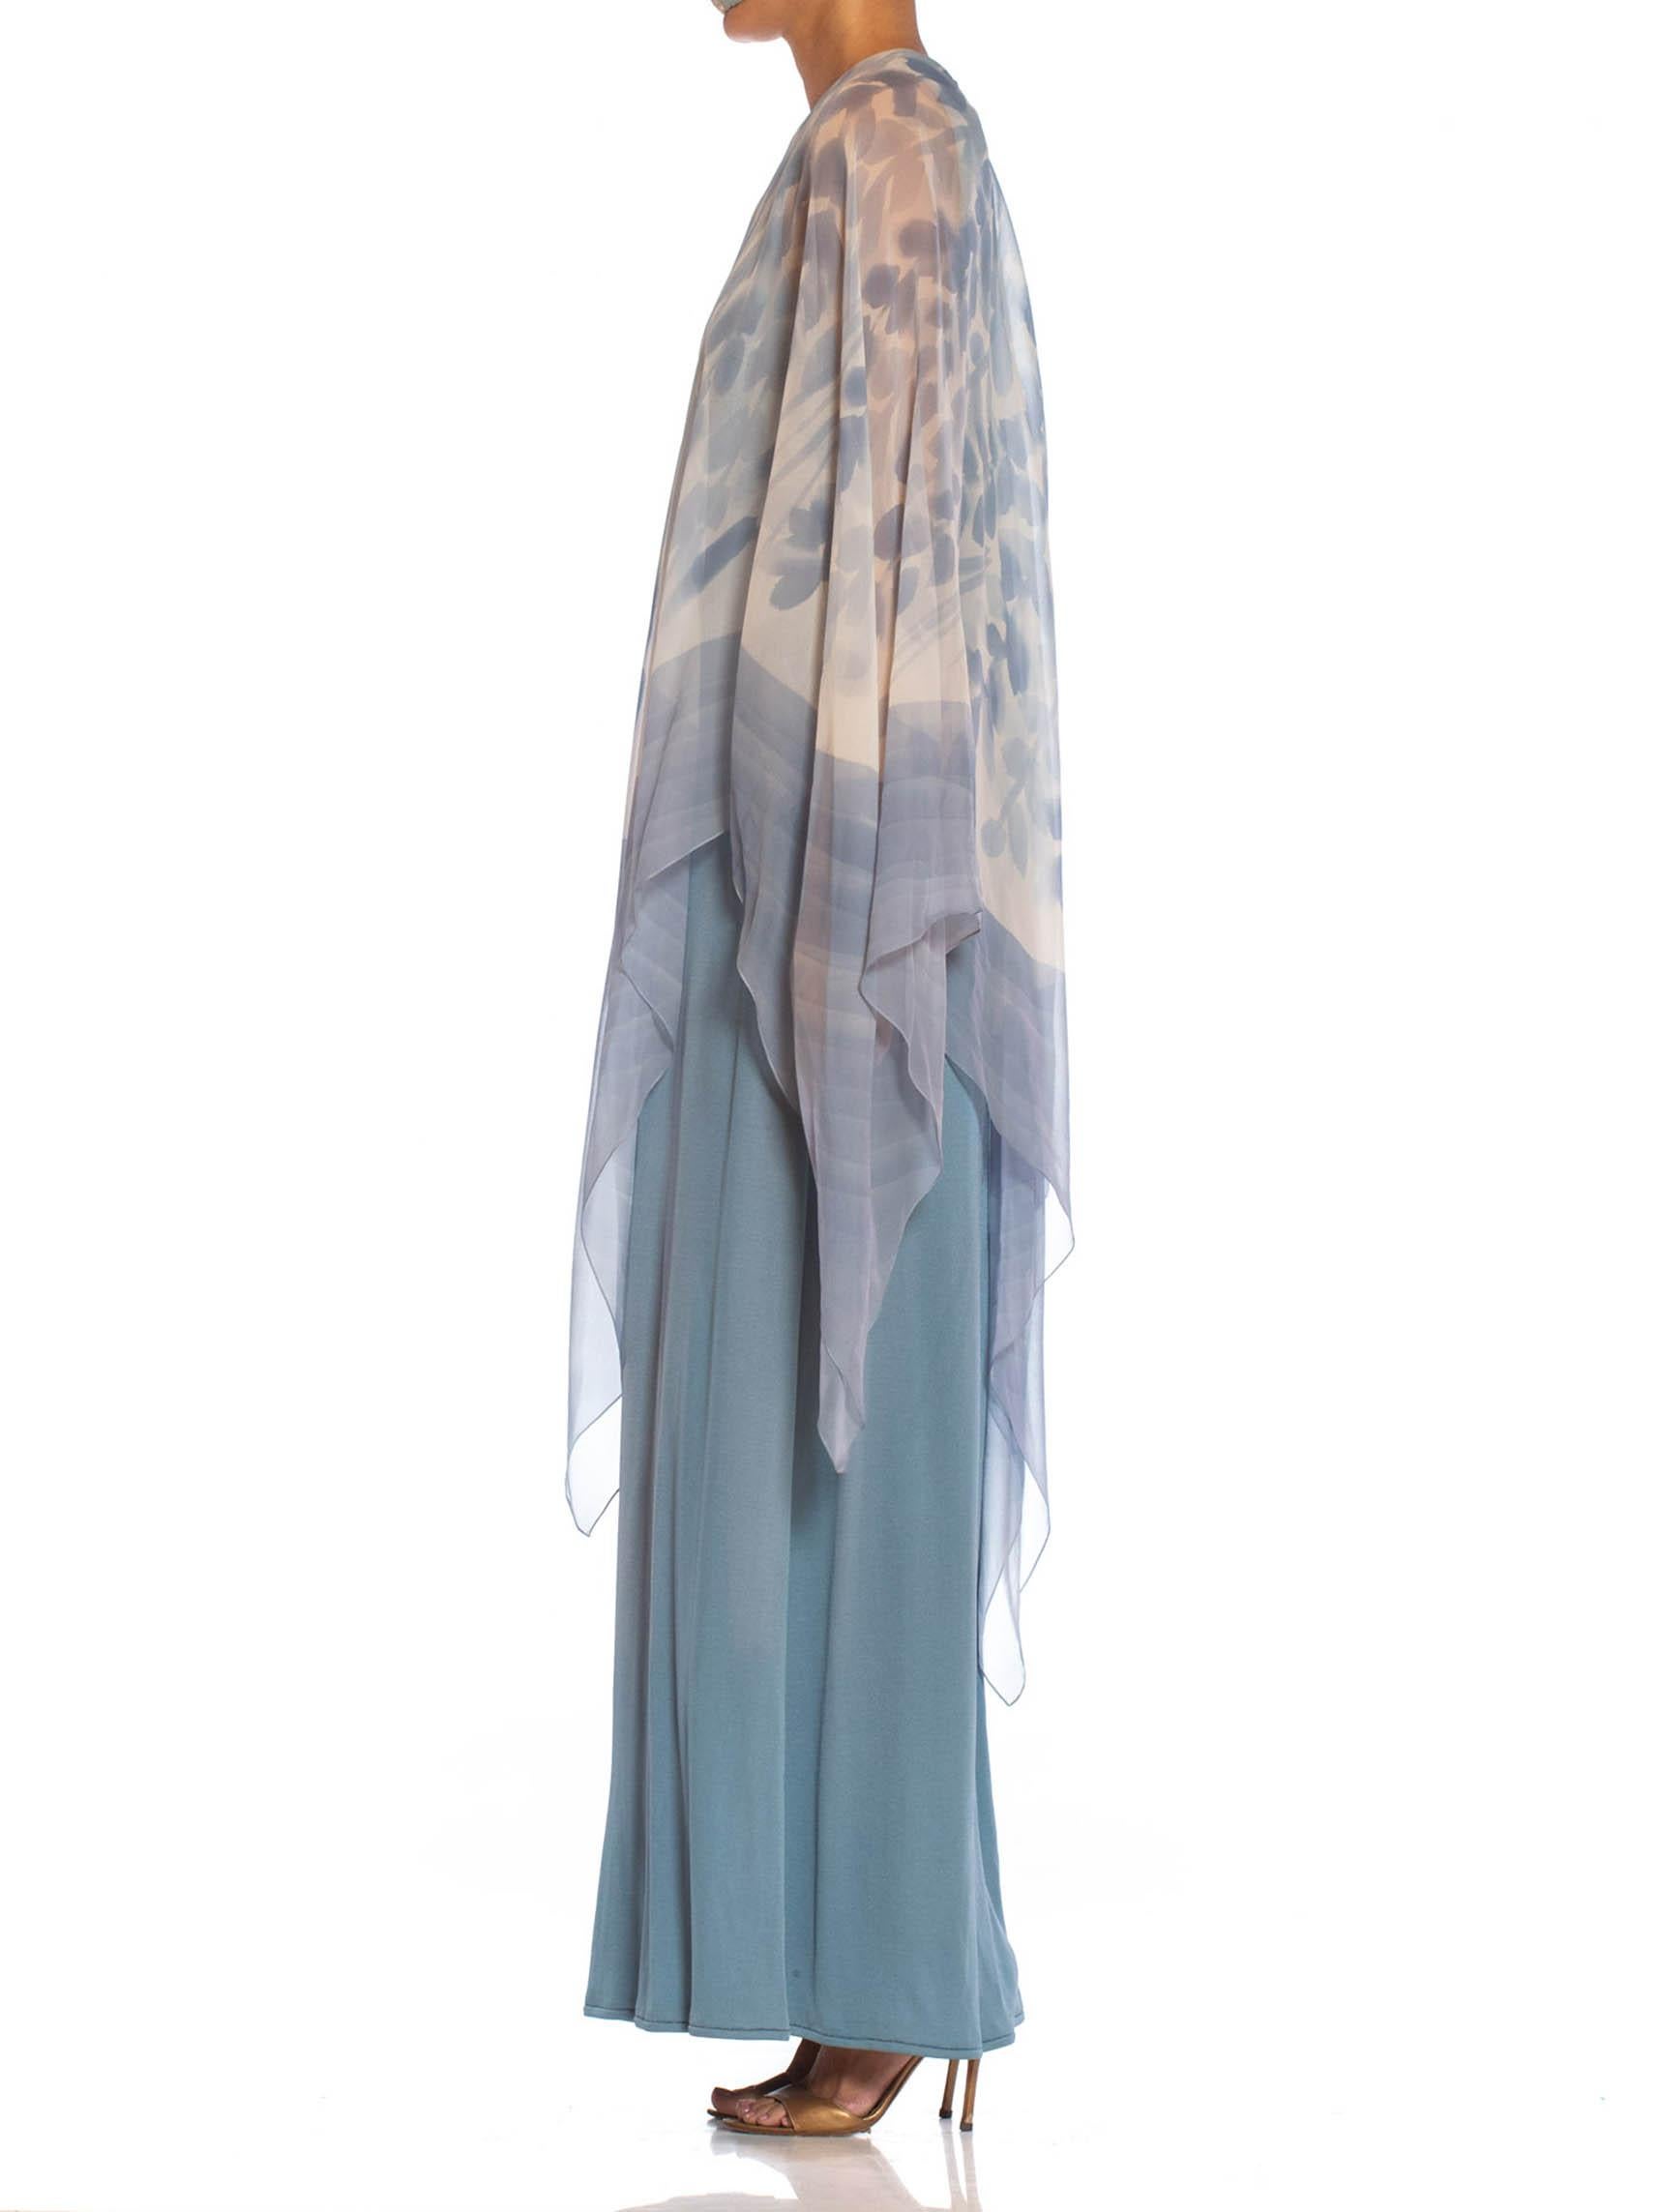 Women's 1970S Dusty Blue Ombré Rayon Jersey Gown With Hand Painted Silk Chiffon Cape